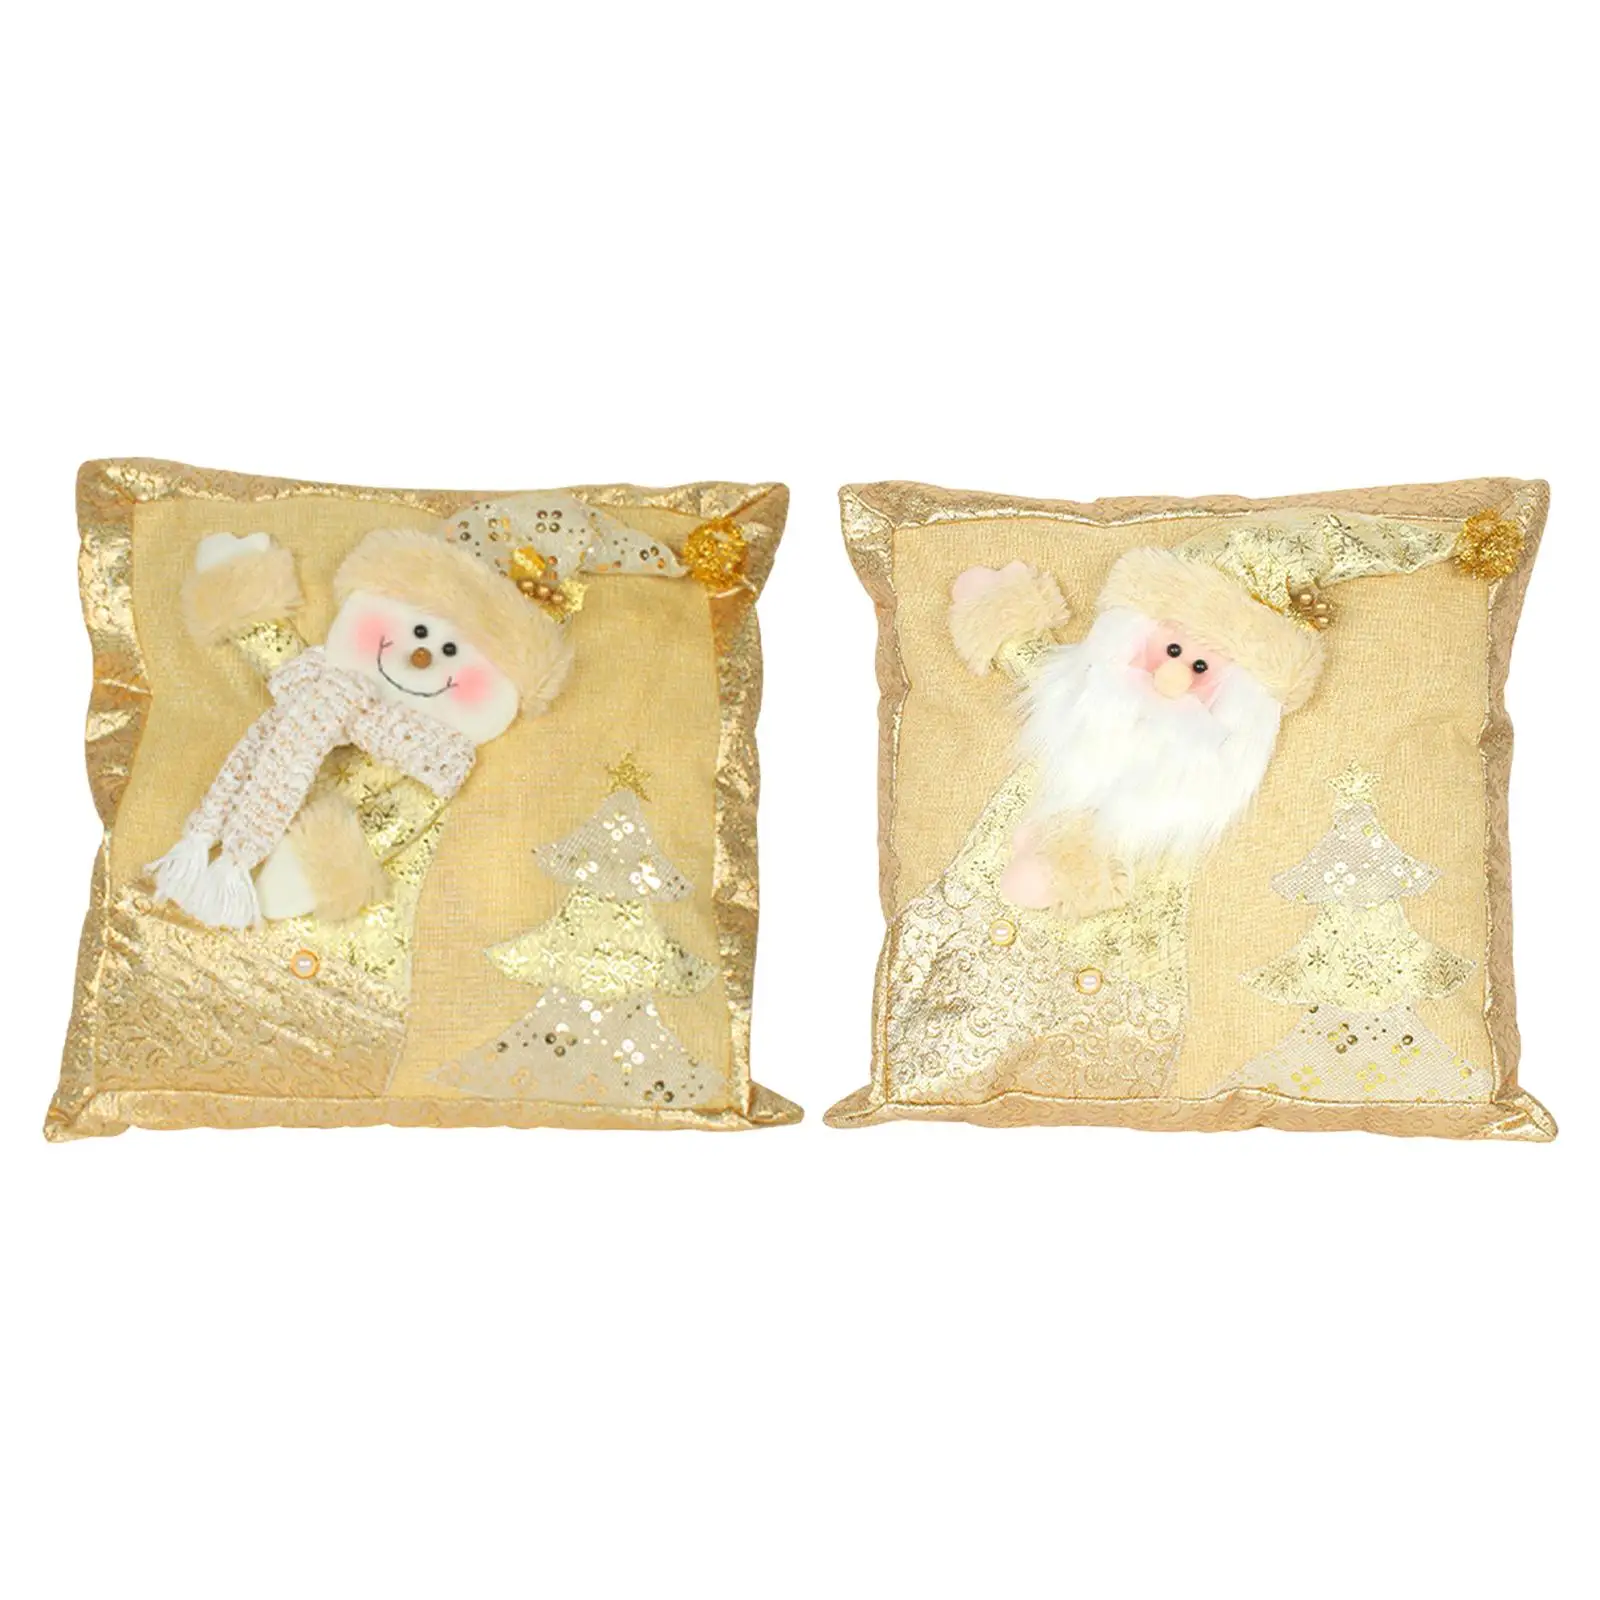 Square Snowman Shaped Pillow Seasonal Cushion Pillow Case Set Snowflake Pillow for Home Decorative Sofa living Room Couch